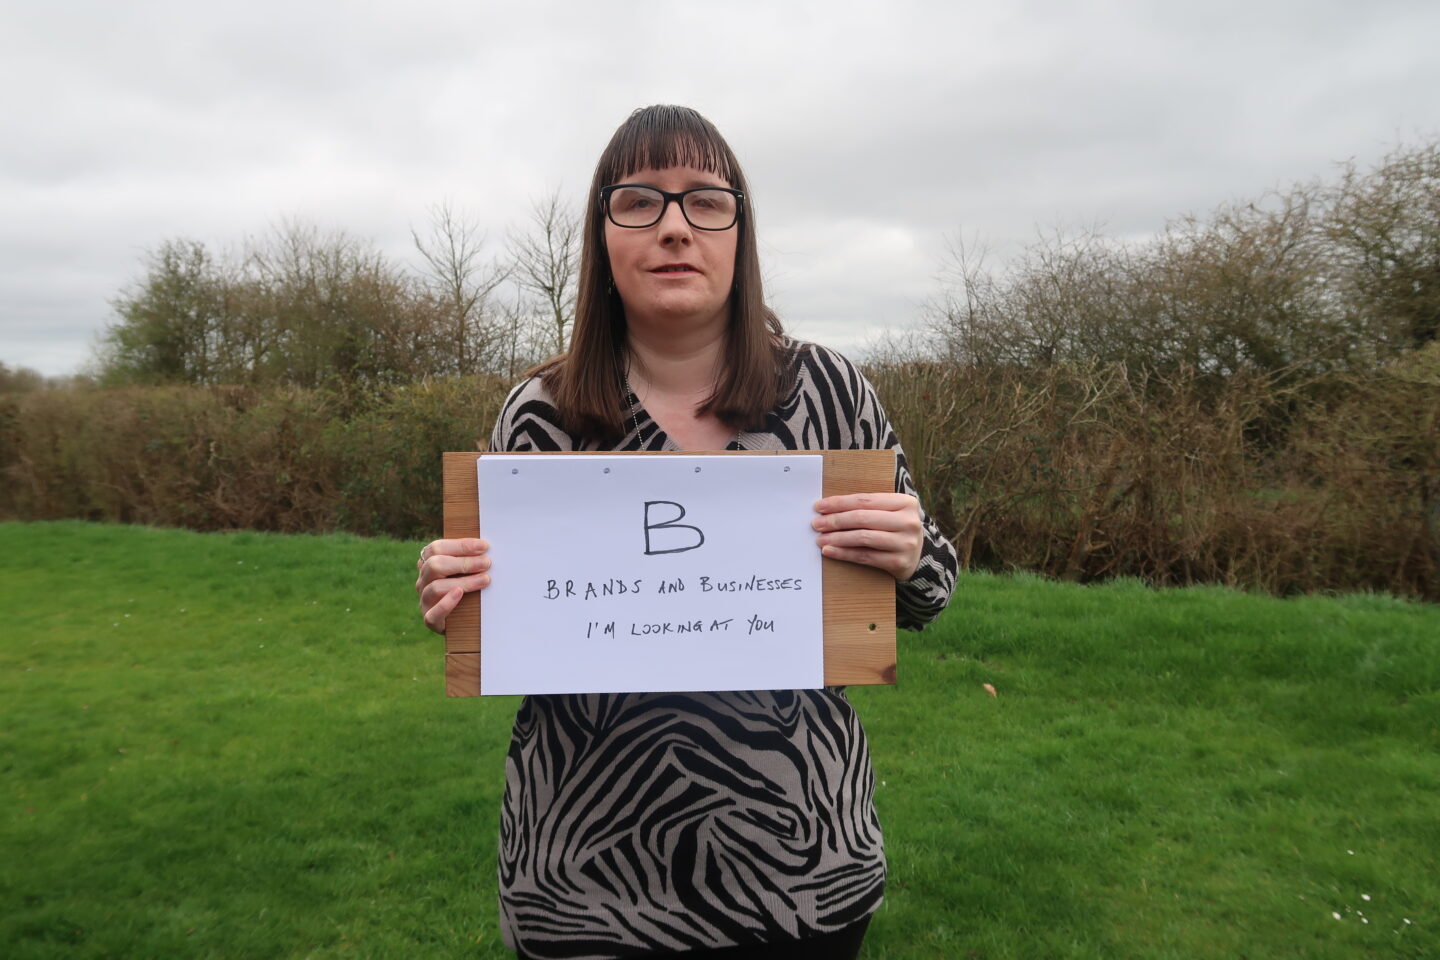 Holly stood on a grassy bank holding up a piece of paper on a wooden board which reads “B: Brands and businesses, I’m looking at you”. She’s wearing a grey and black patterned jumper and black leggings.